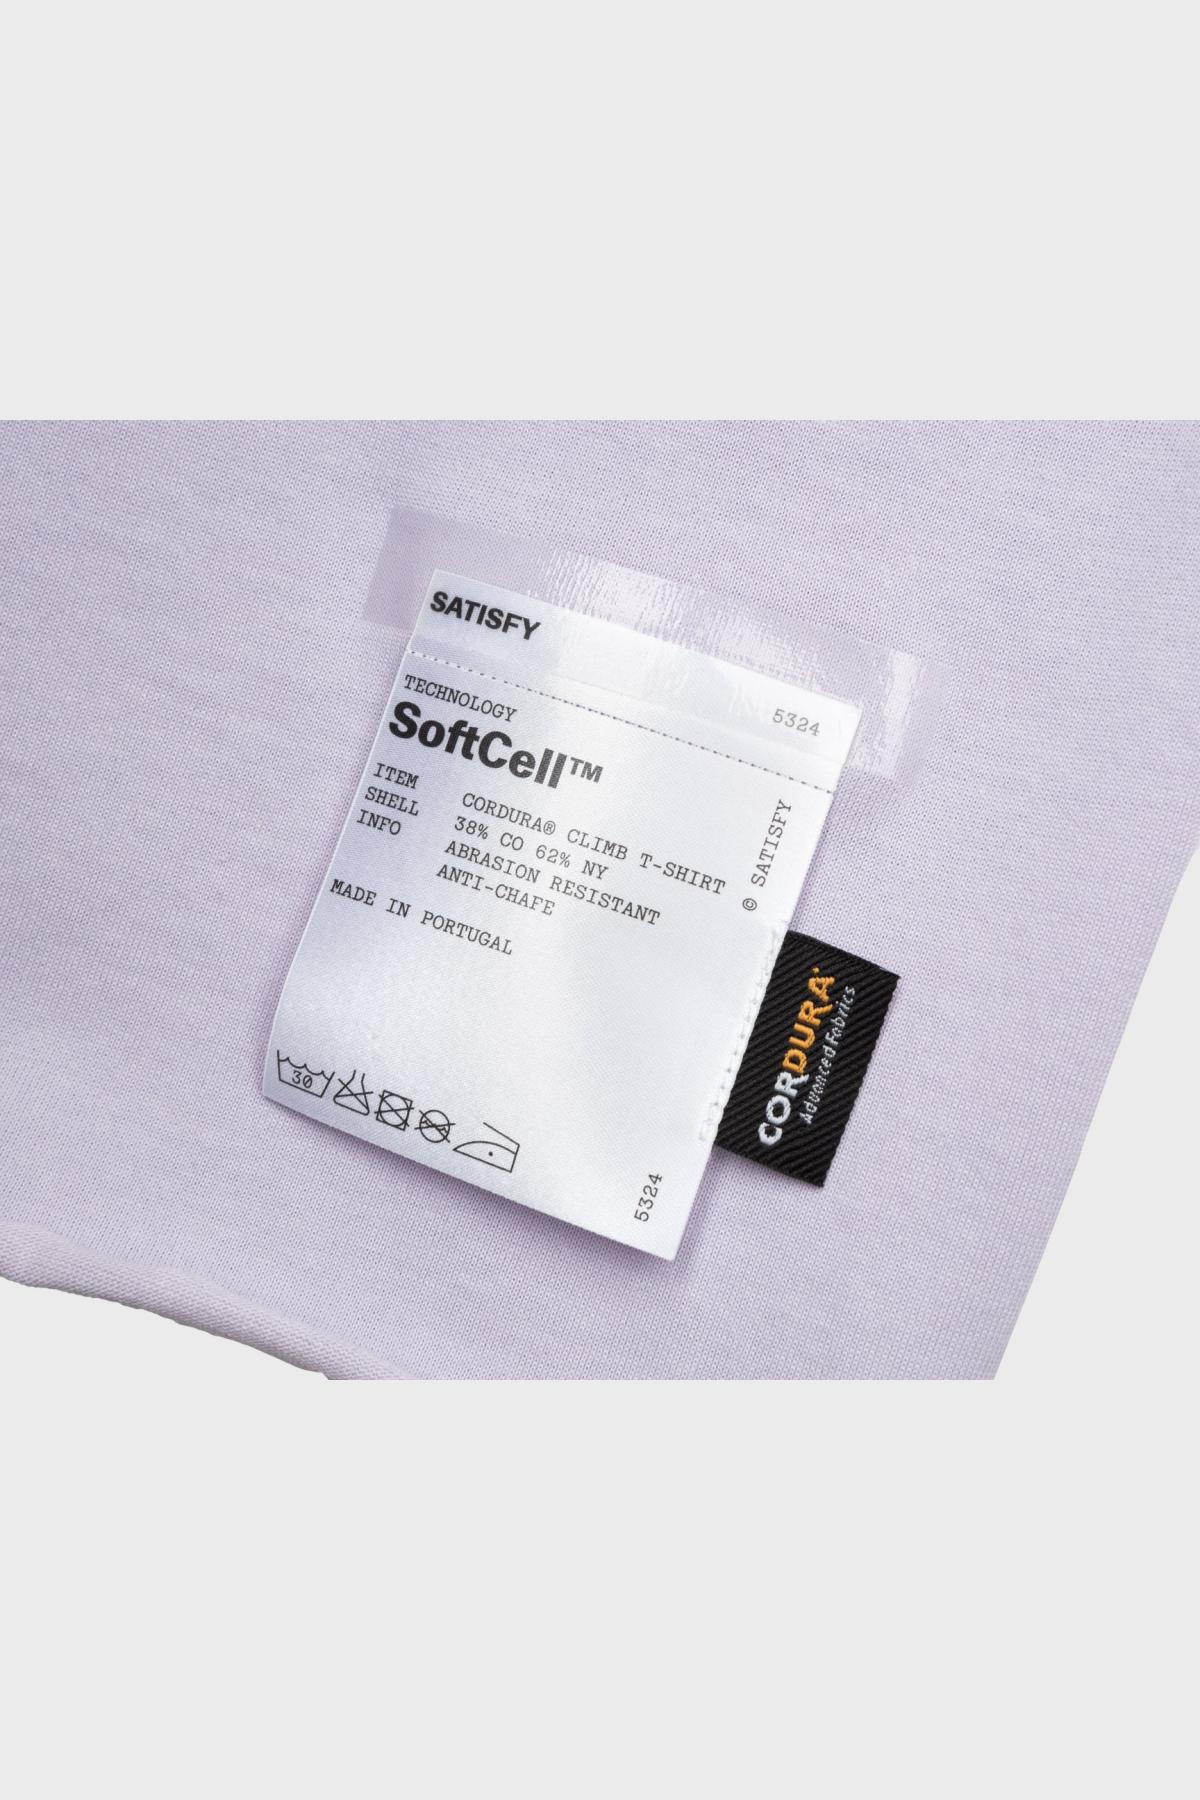 SATISFY - SOFTCELL CORDURA CLIMATE T-SHIRT